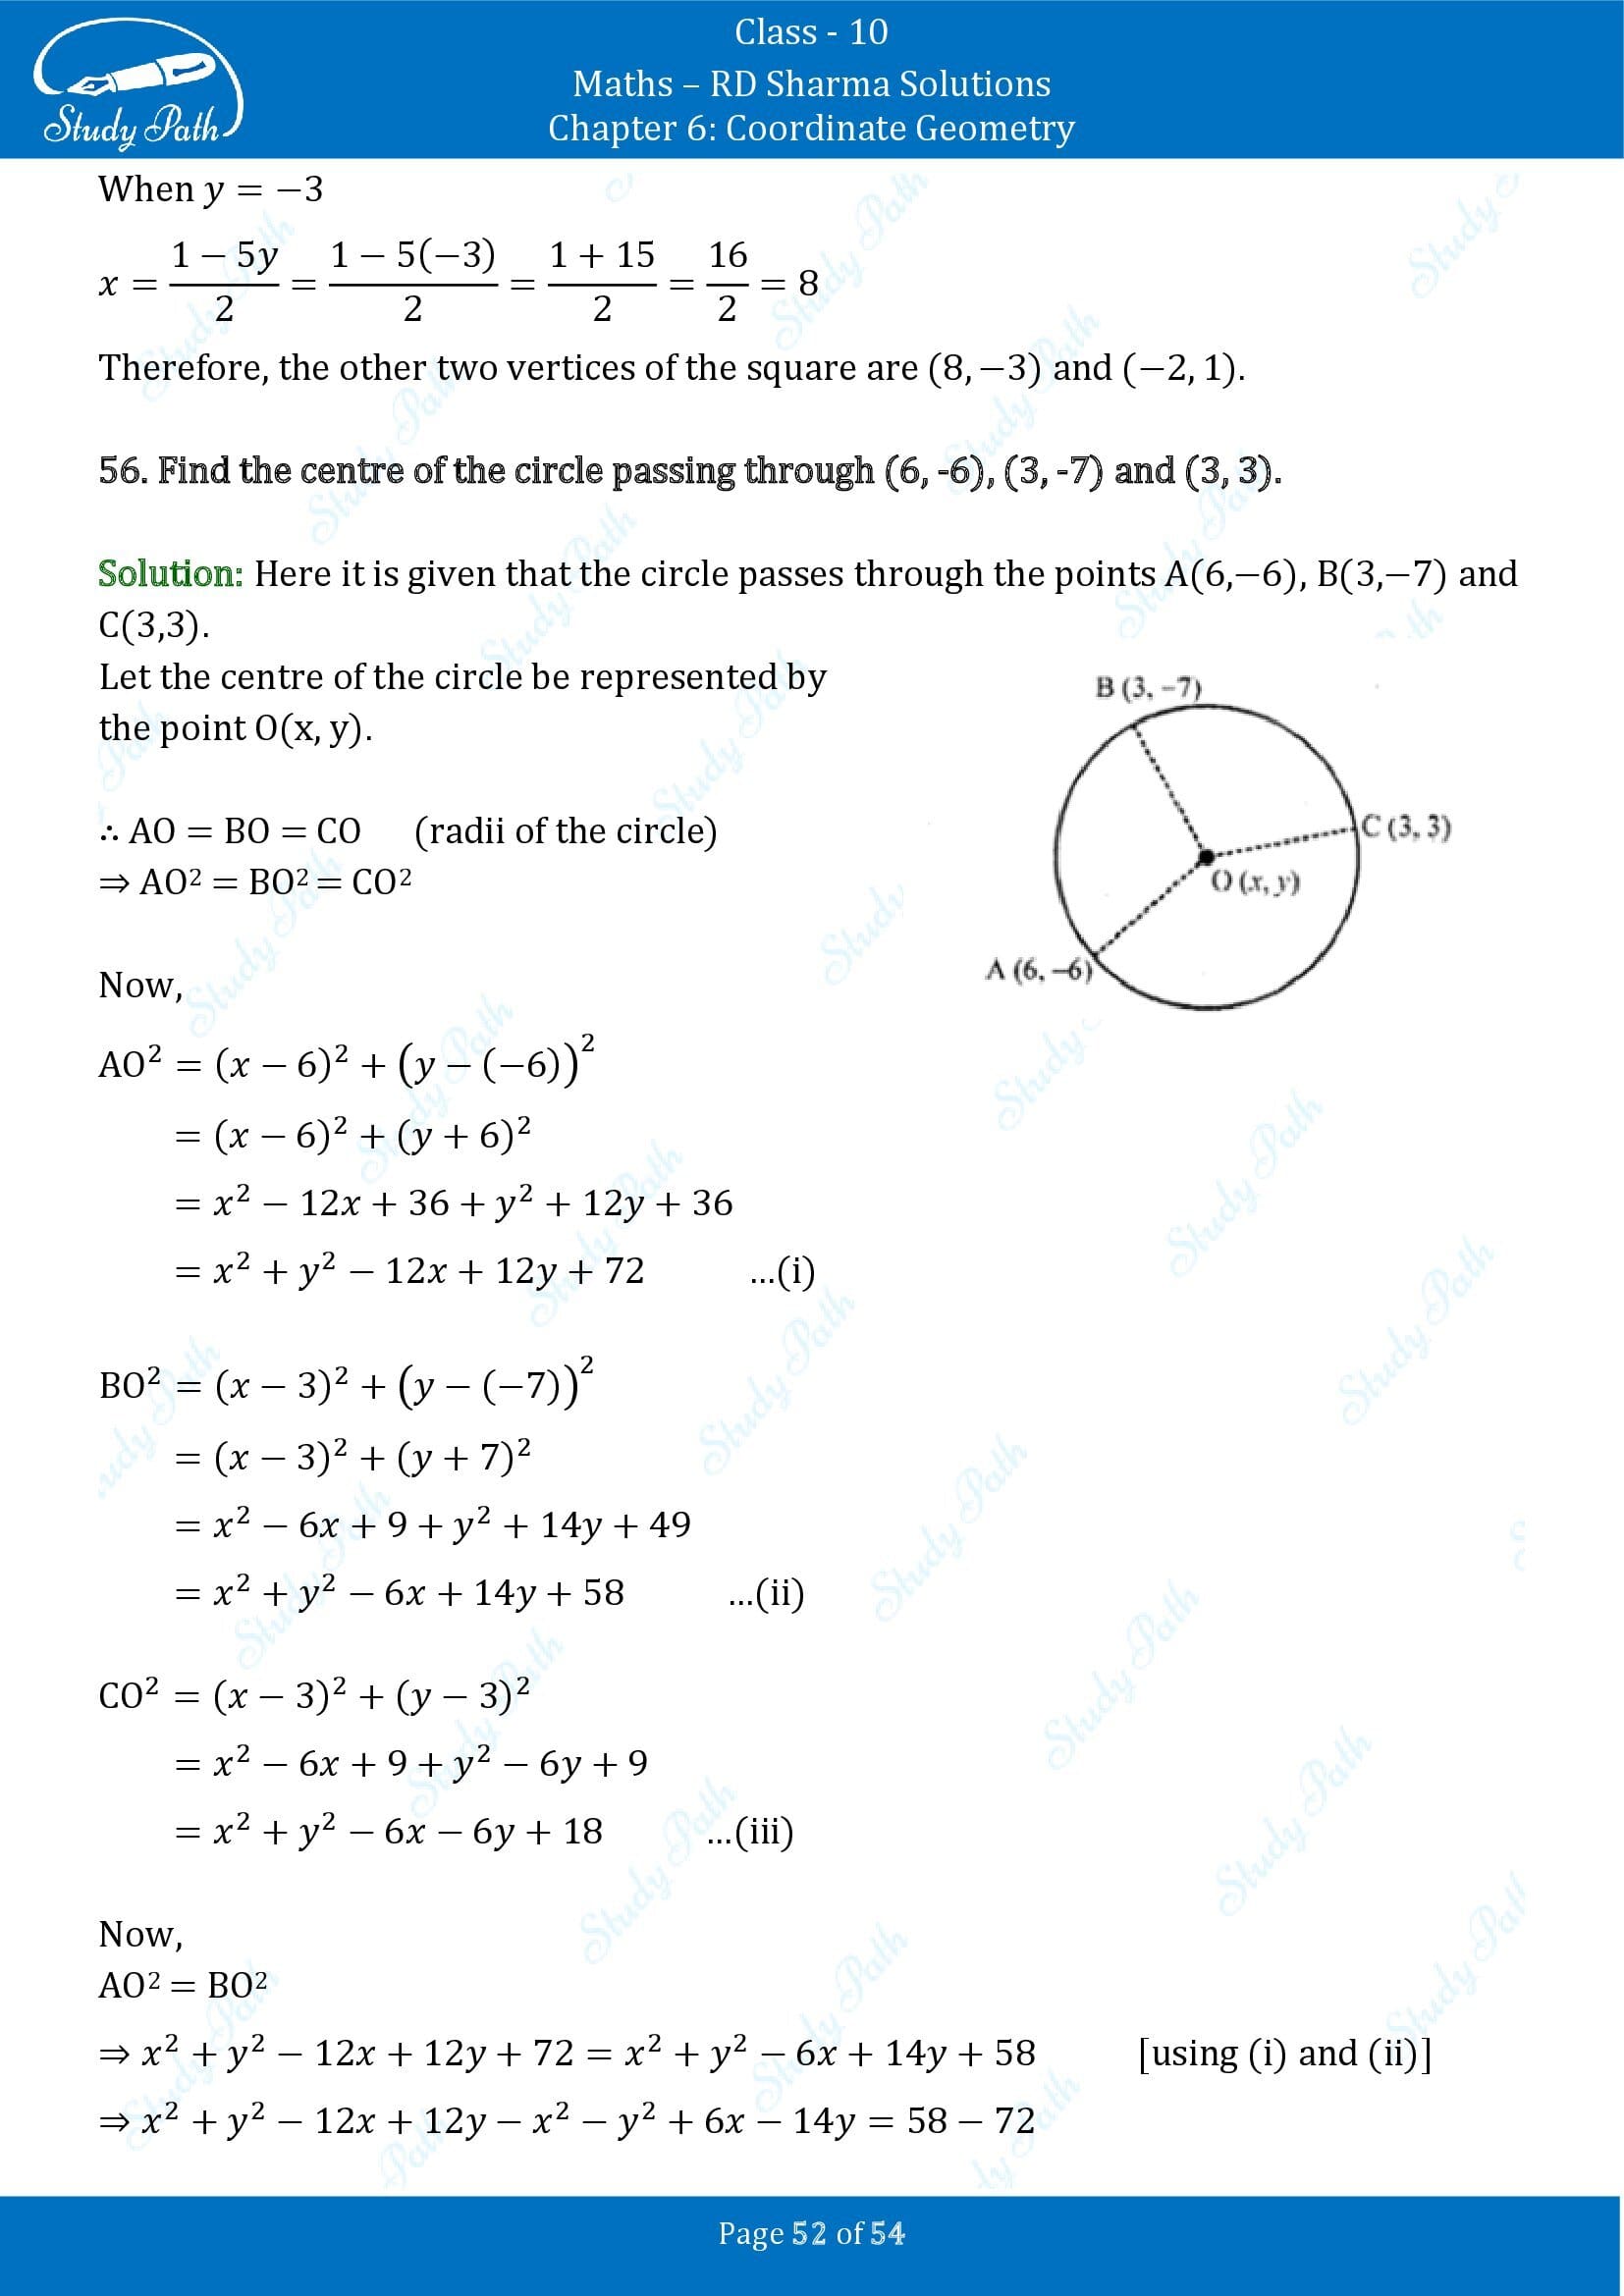 RD Sharma Solutions Class 10 Chapter 6 Coordinate Geometry Exercise 6.2 0052